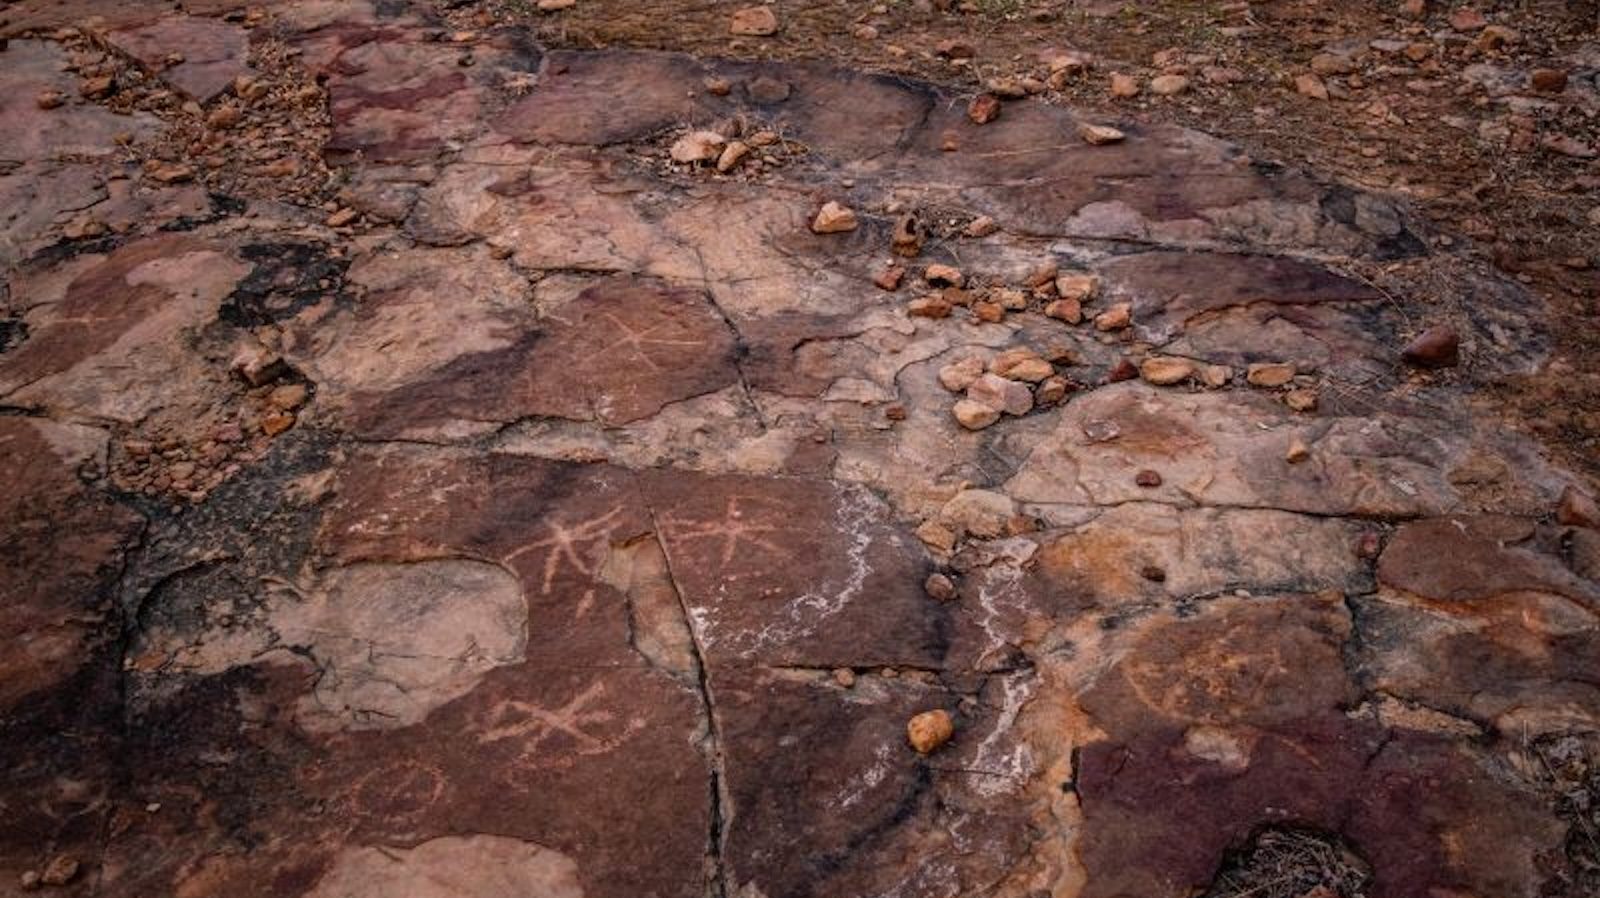 Mysterious symbols found near footprints shed light on ancient humans' knowledge of dinosaurs, scientists said